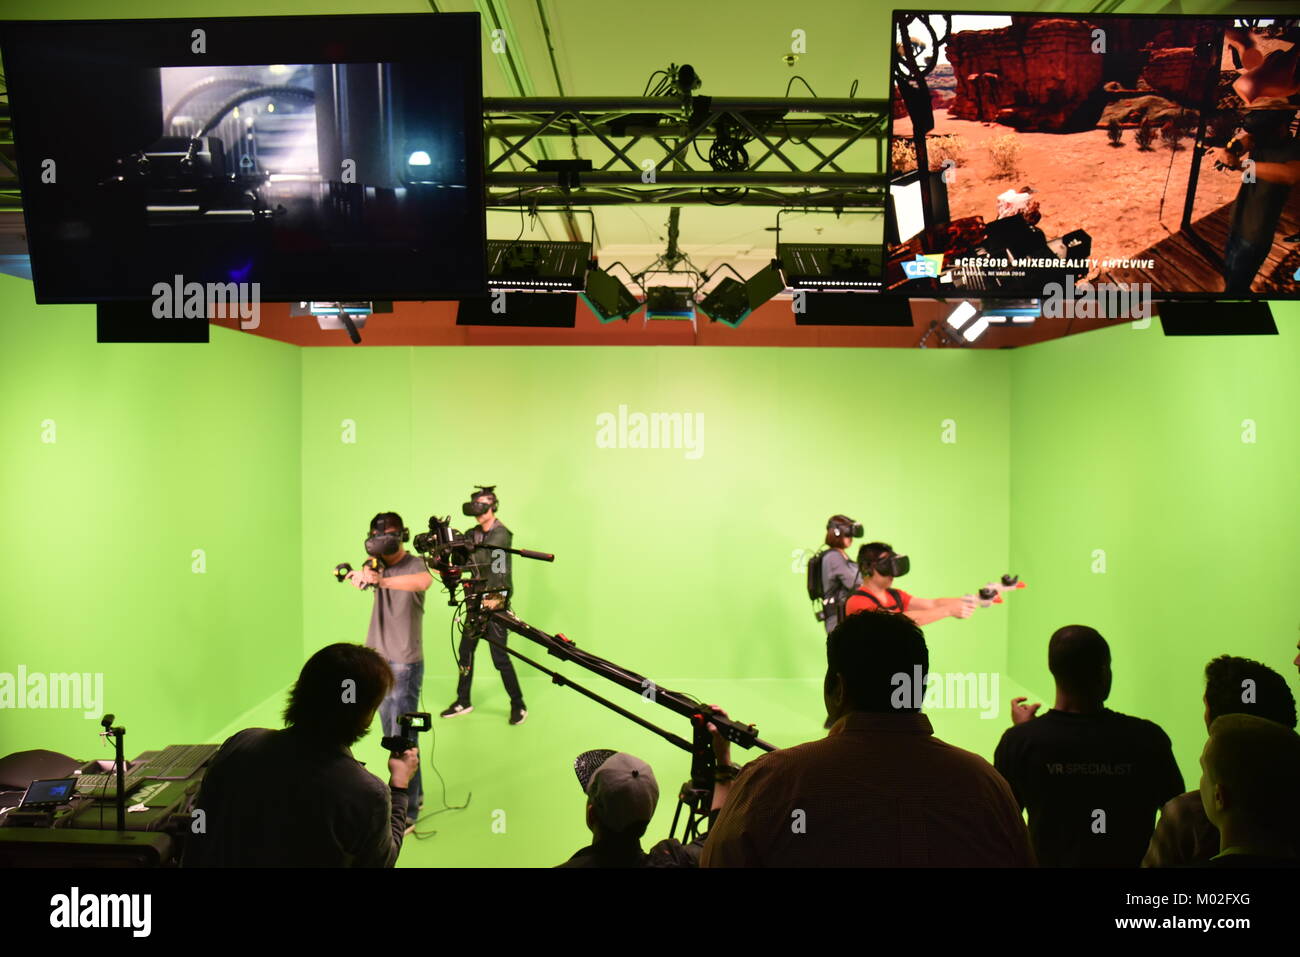 Mixed Reality Virtual Reality Demo In Green Screen Zimmer